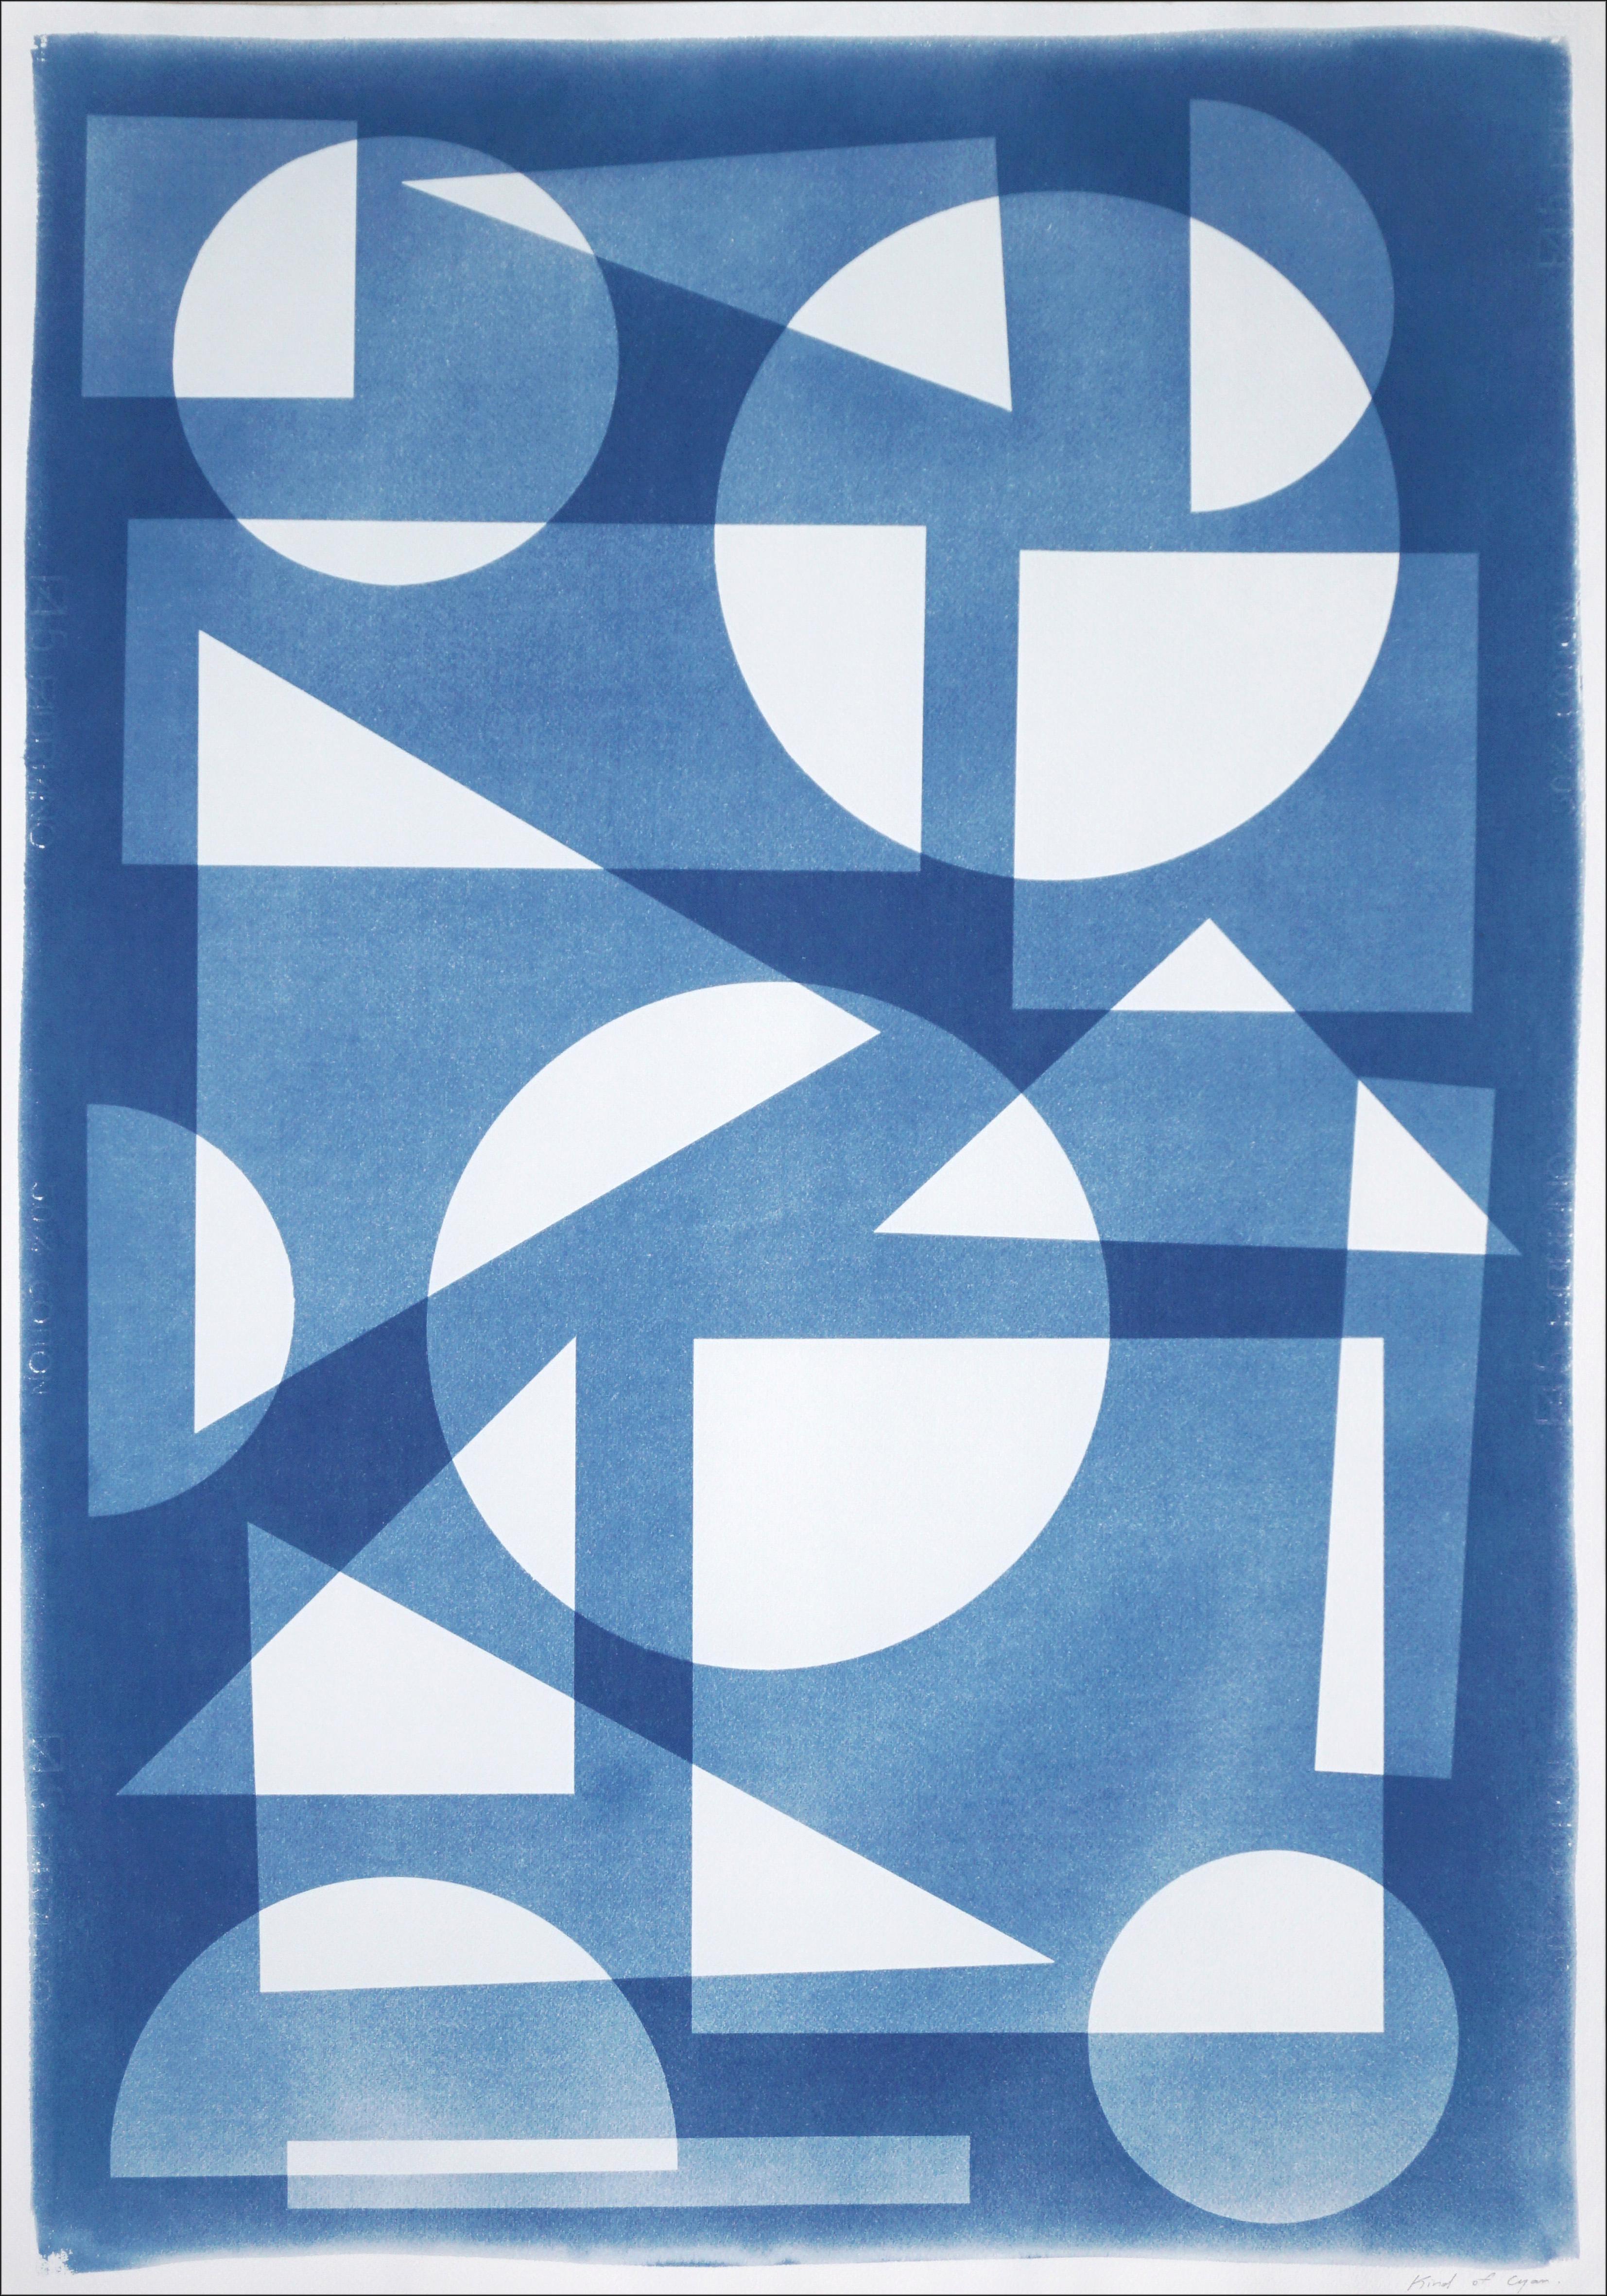 Kind of Cyan Abstract Print - Art Deco Geometry in Blue, Vertical Architecture, Primary Shapes, Suprematist 